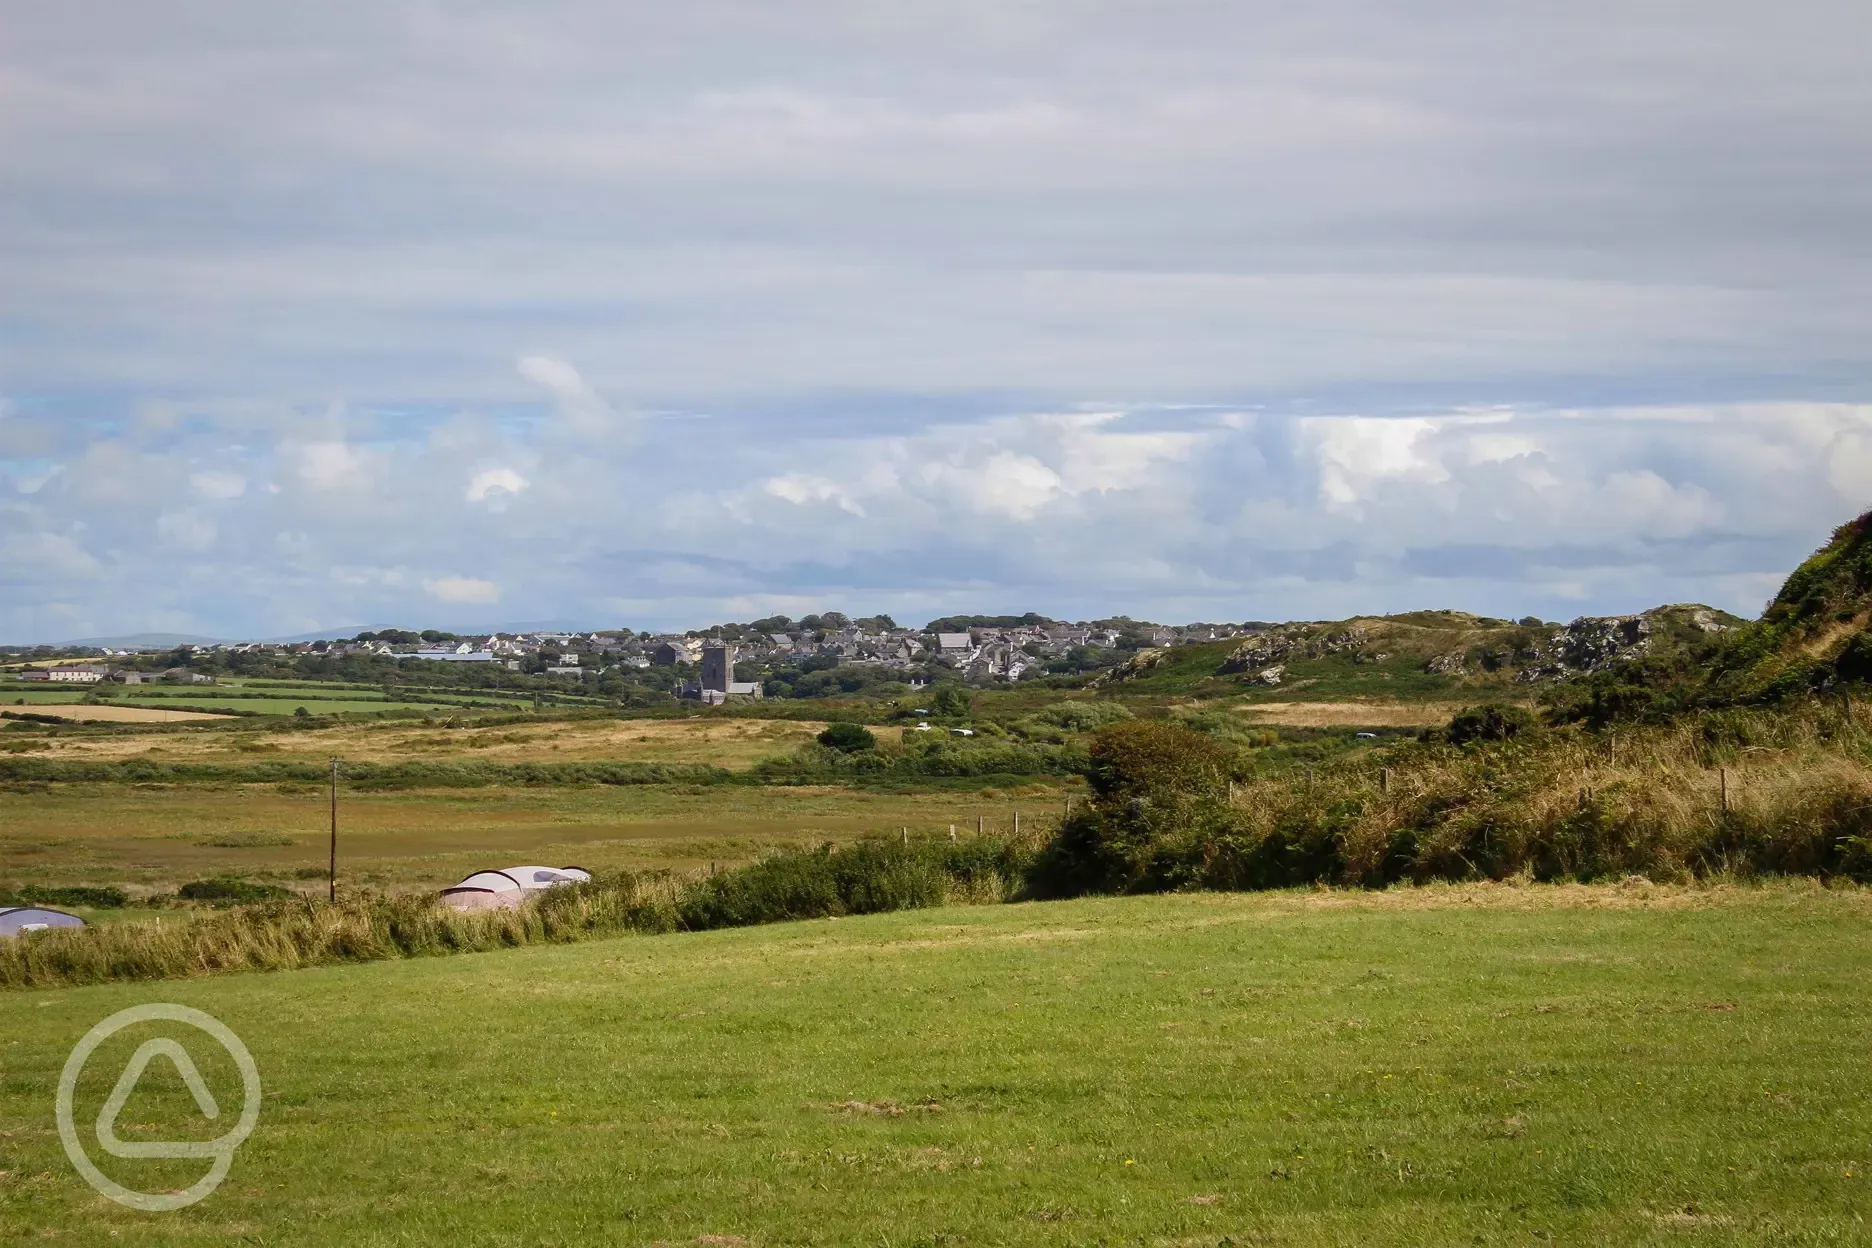 A view from the site over to St Davids and the cathedral